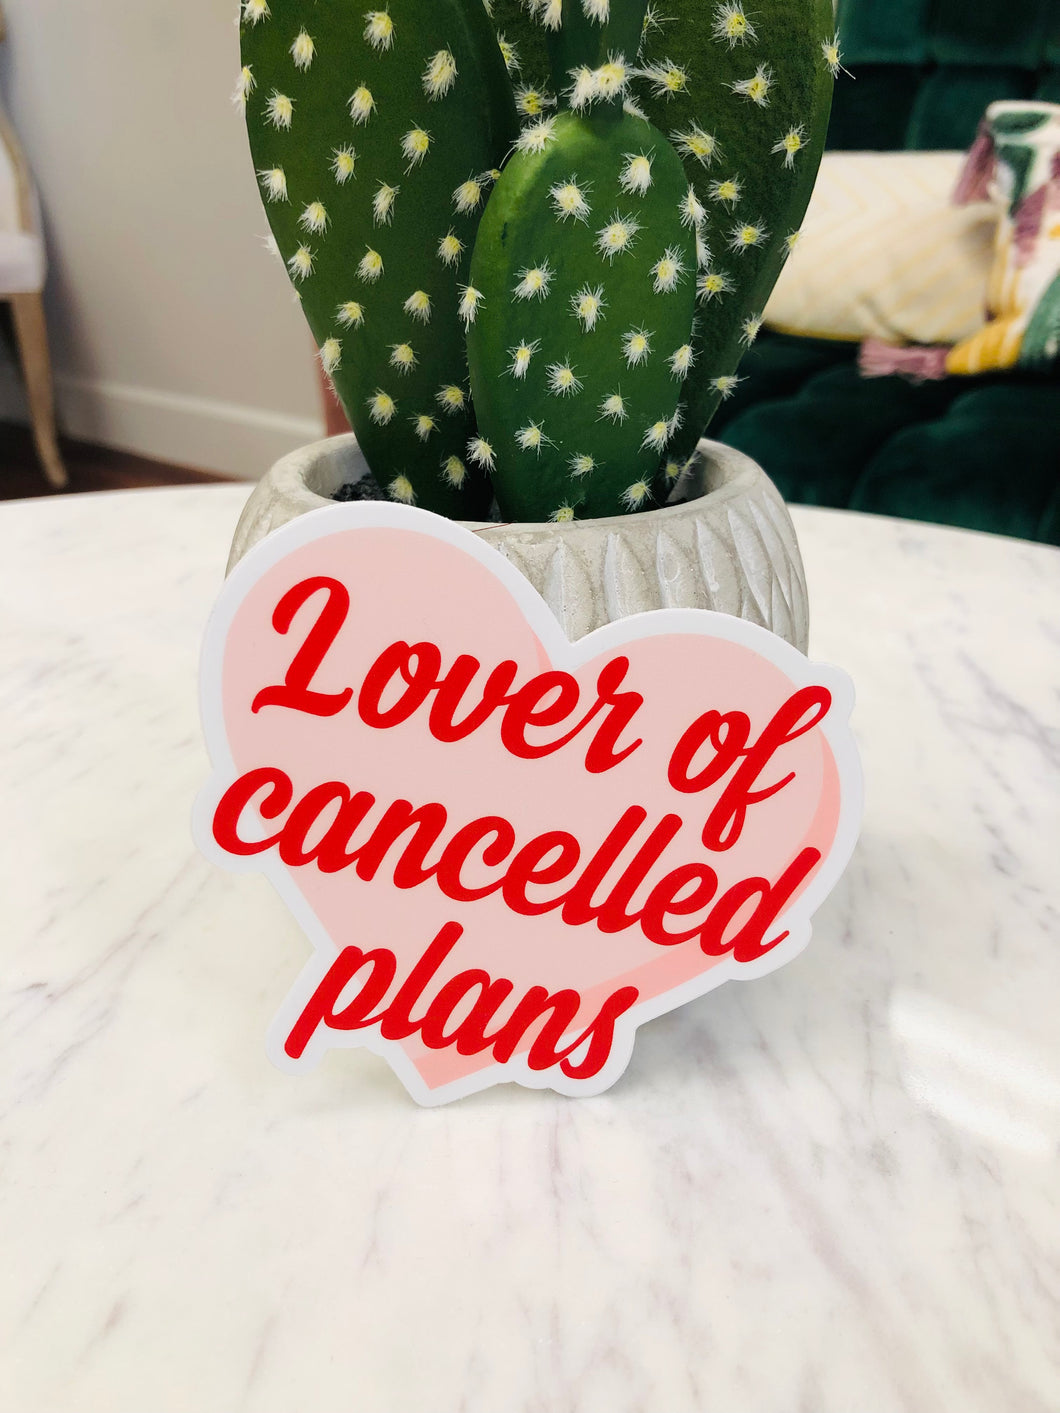 Lover of Cancelled Plans Sticker